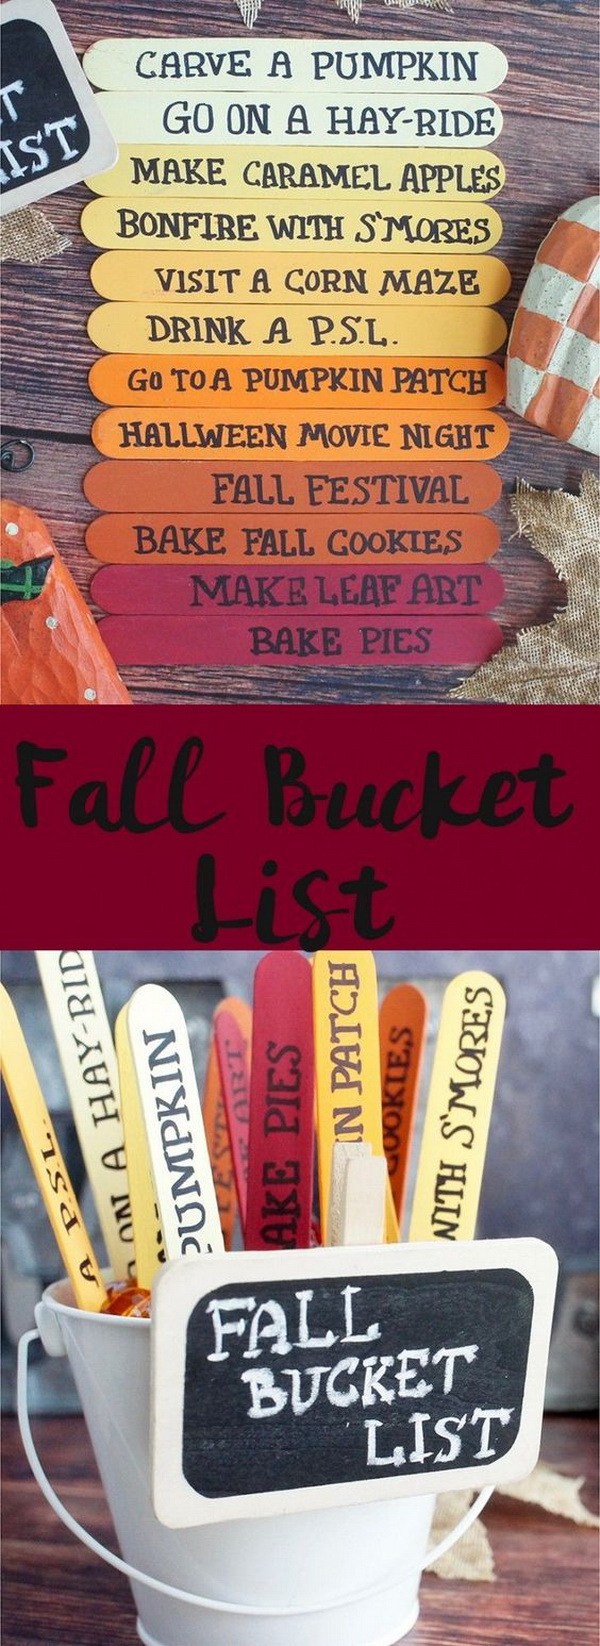 Great fall crafts for kids to make this season!